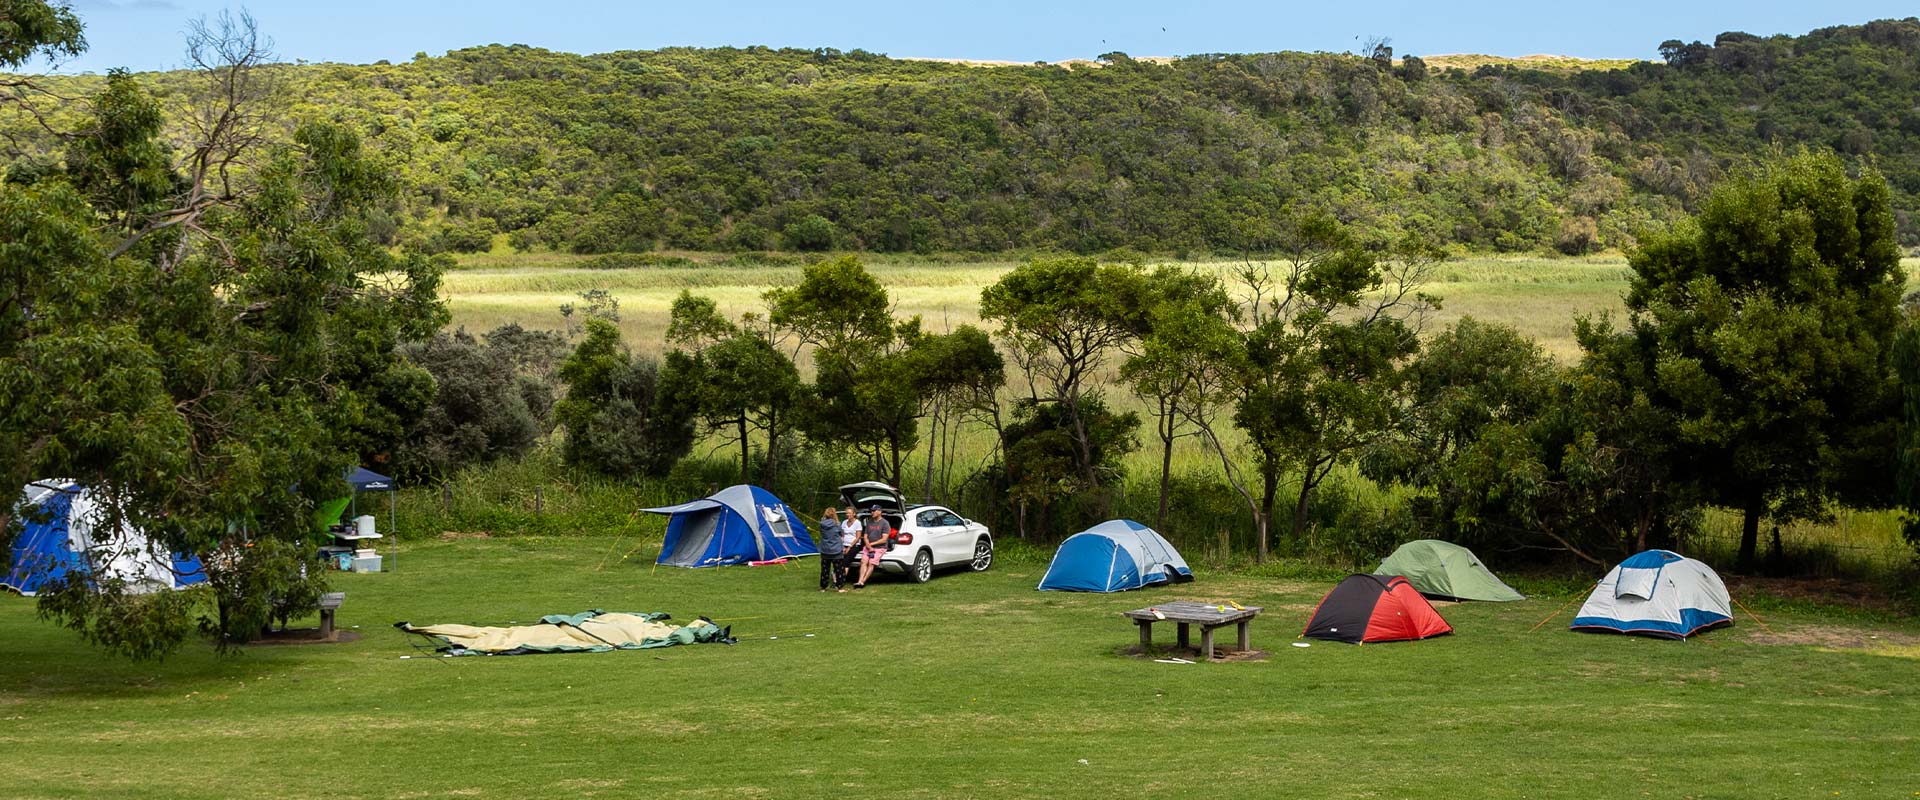 A collection of collourful family-sized tents setup on a lush green lawn in front of a row of small trees with a hill covered in shrubbs in the distant background